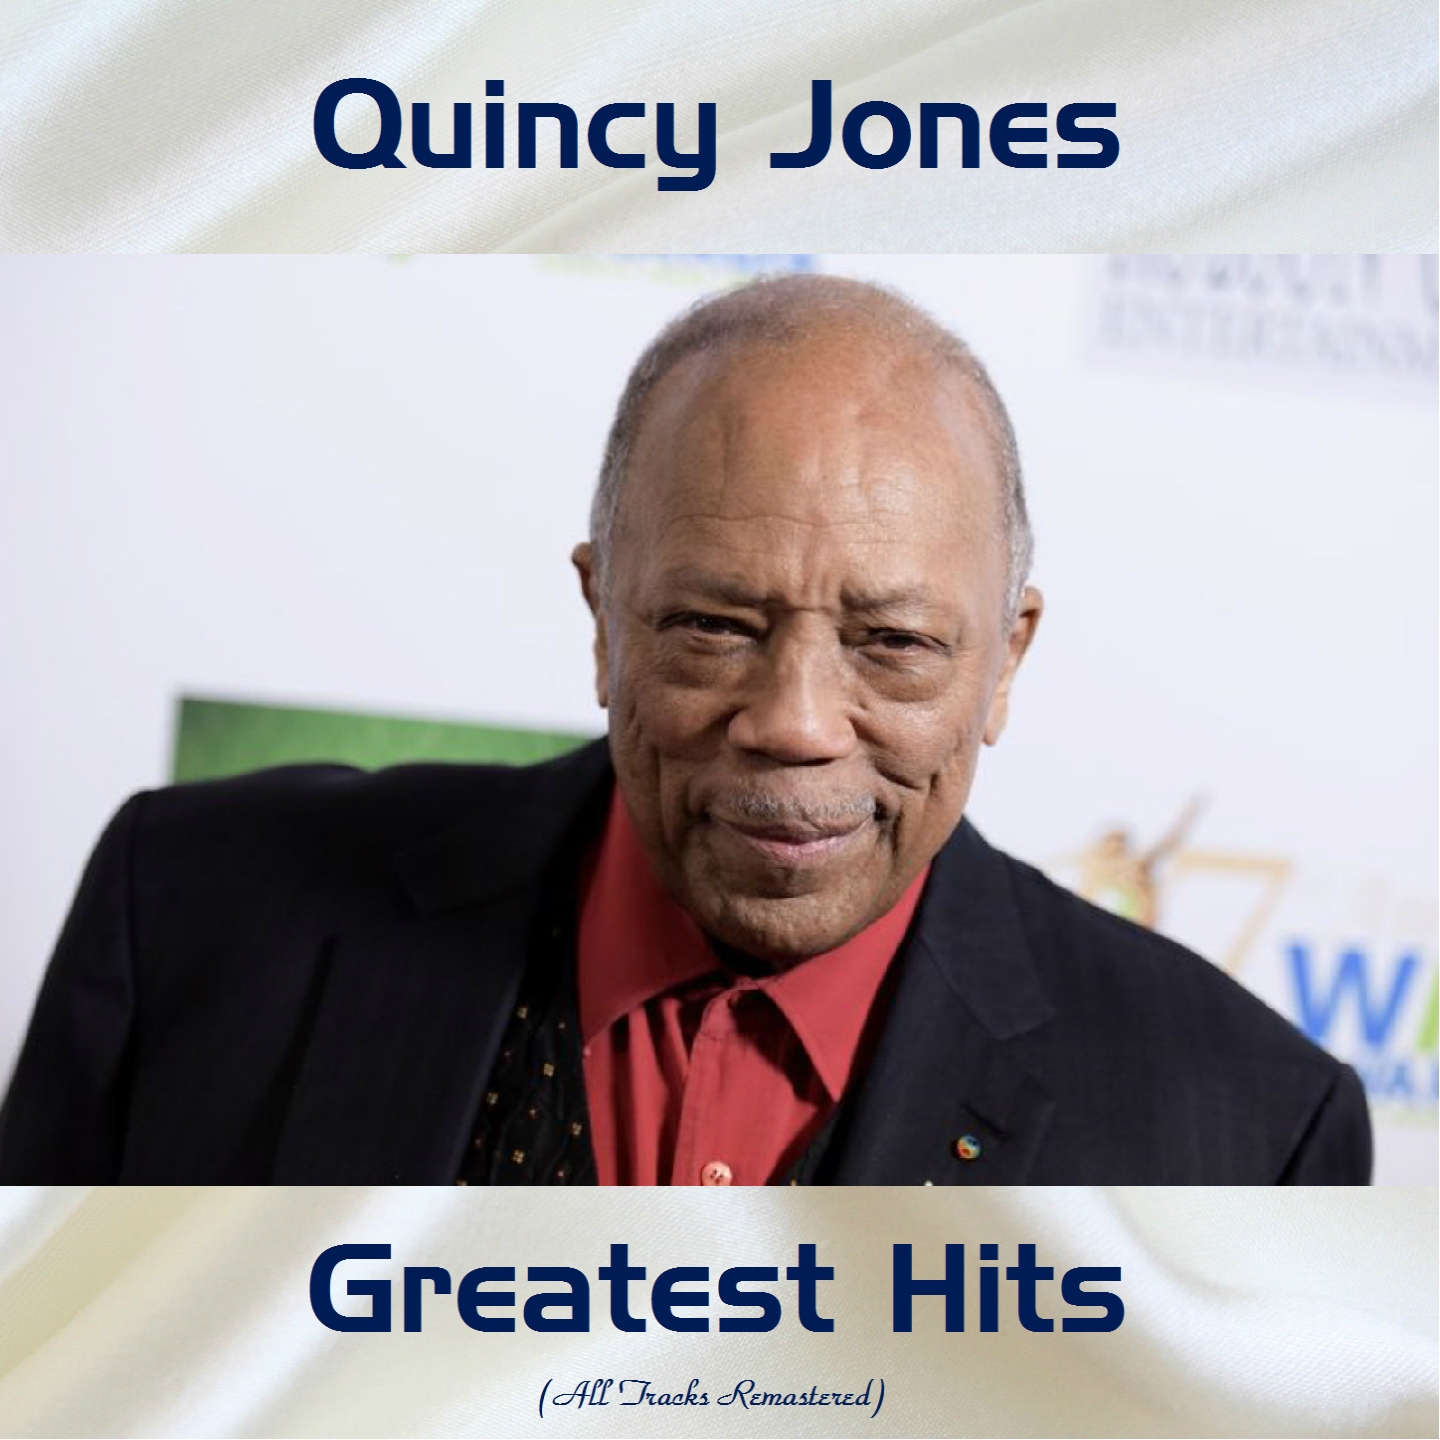 Quincy Jones Greatest Hits (All Tracks Remastered)